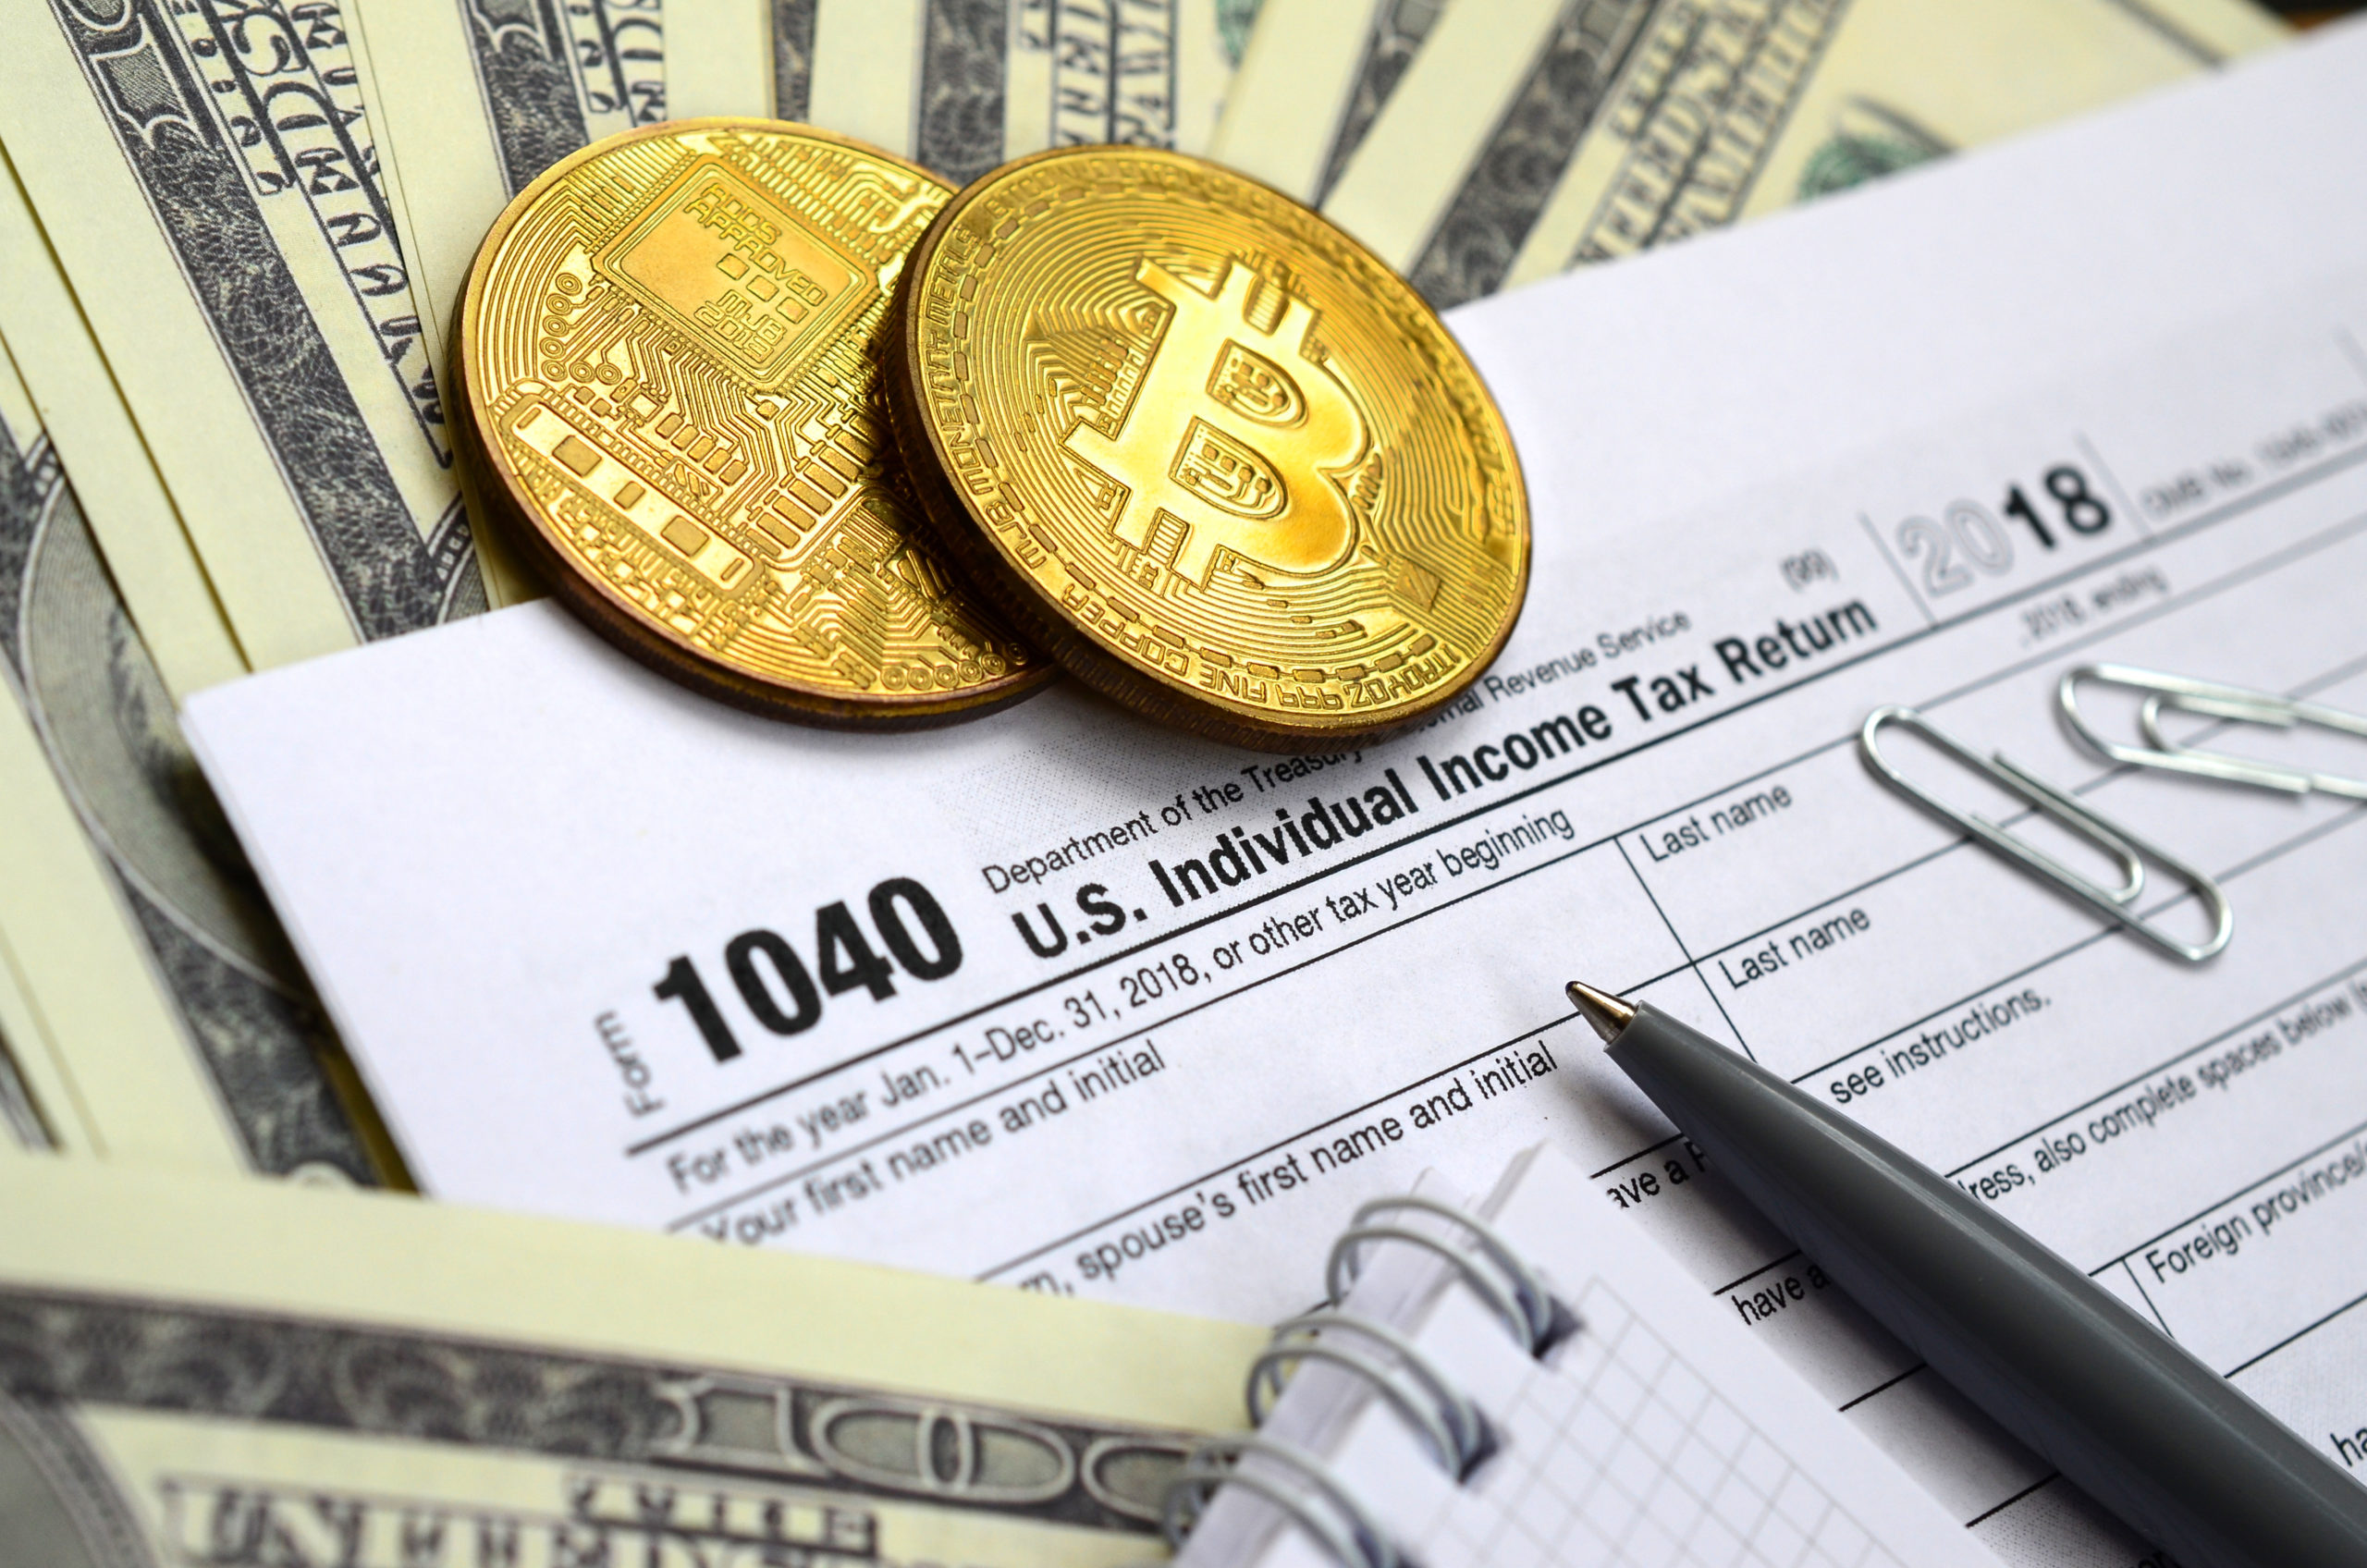 Photo of a pen, physical bitcoins and $100 bills on a 1040 U.S. tax form.